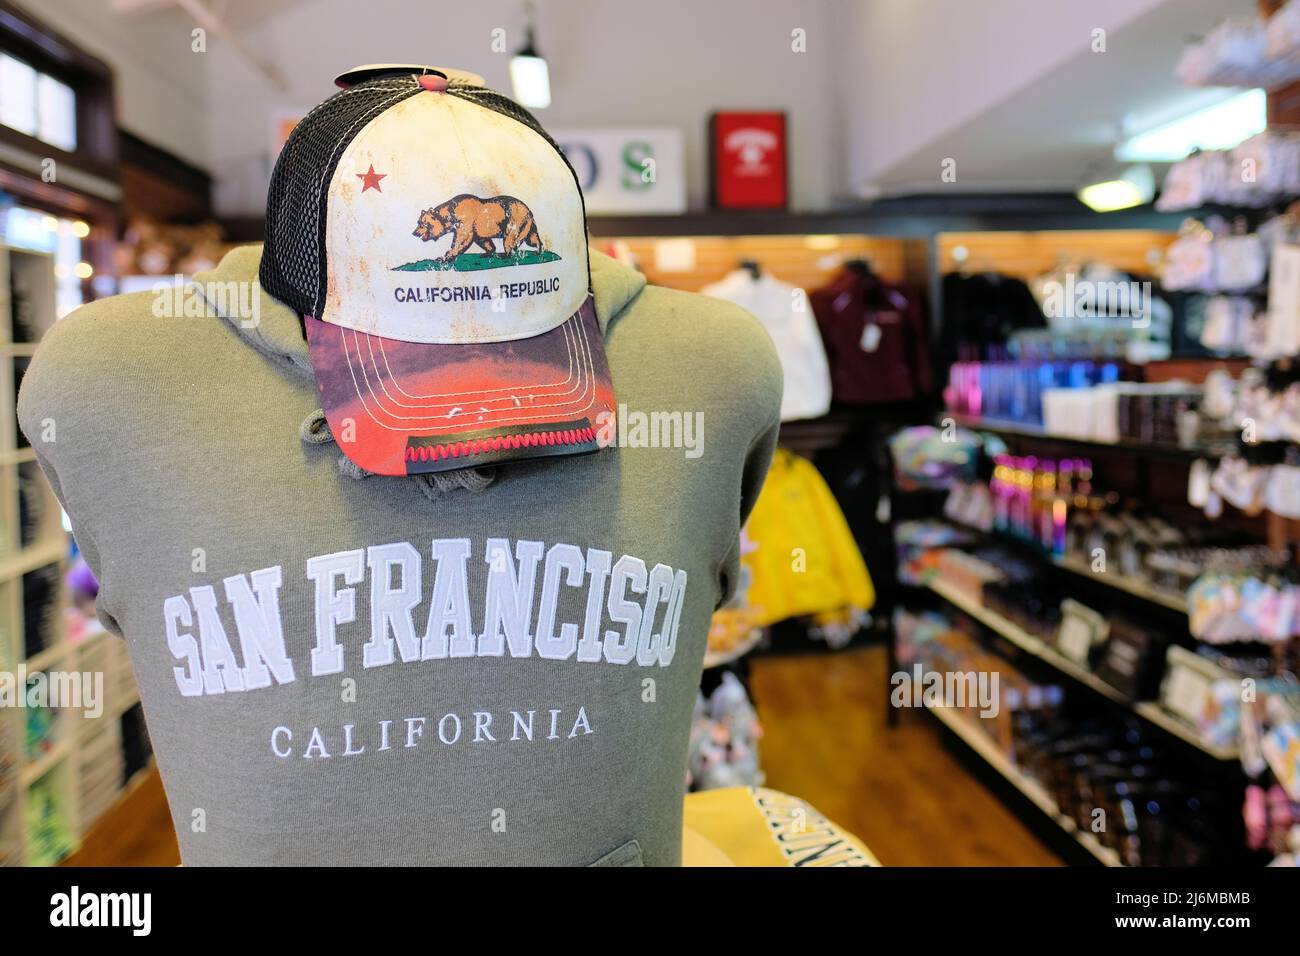 California Republic cap and San Francisco t-shirt; giftshop items for Bay Area visitors and tourists; gift store mementos and souvenirs. Stock Photo